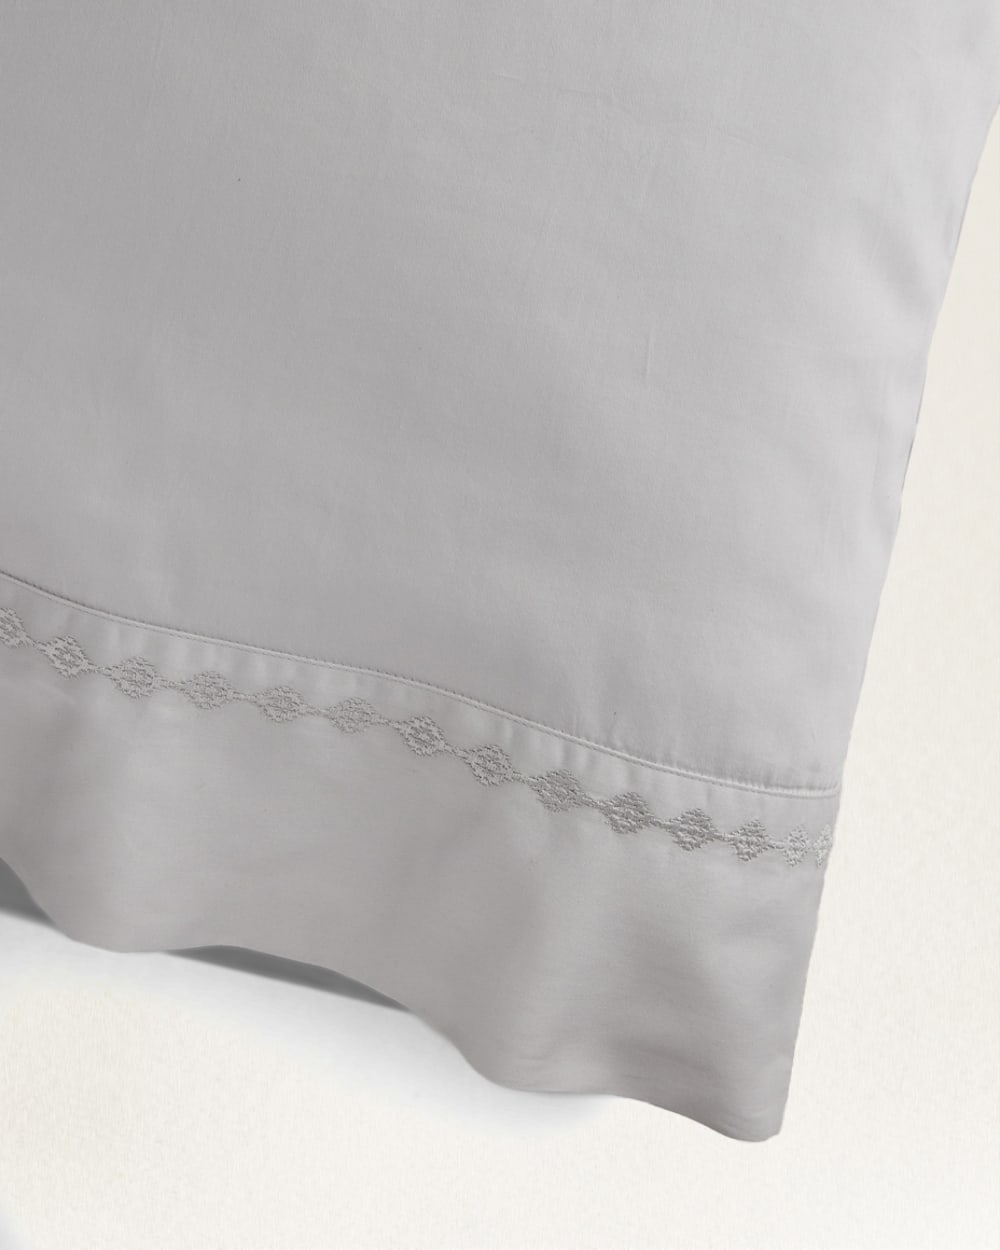 ALTERNATE VIEW OF MOONLIT MESA EMBROIDERED PILLOWCASES IN LIGHT GREY image number 2